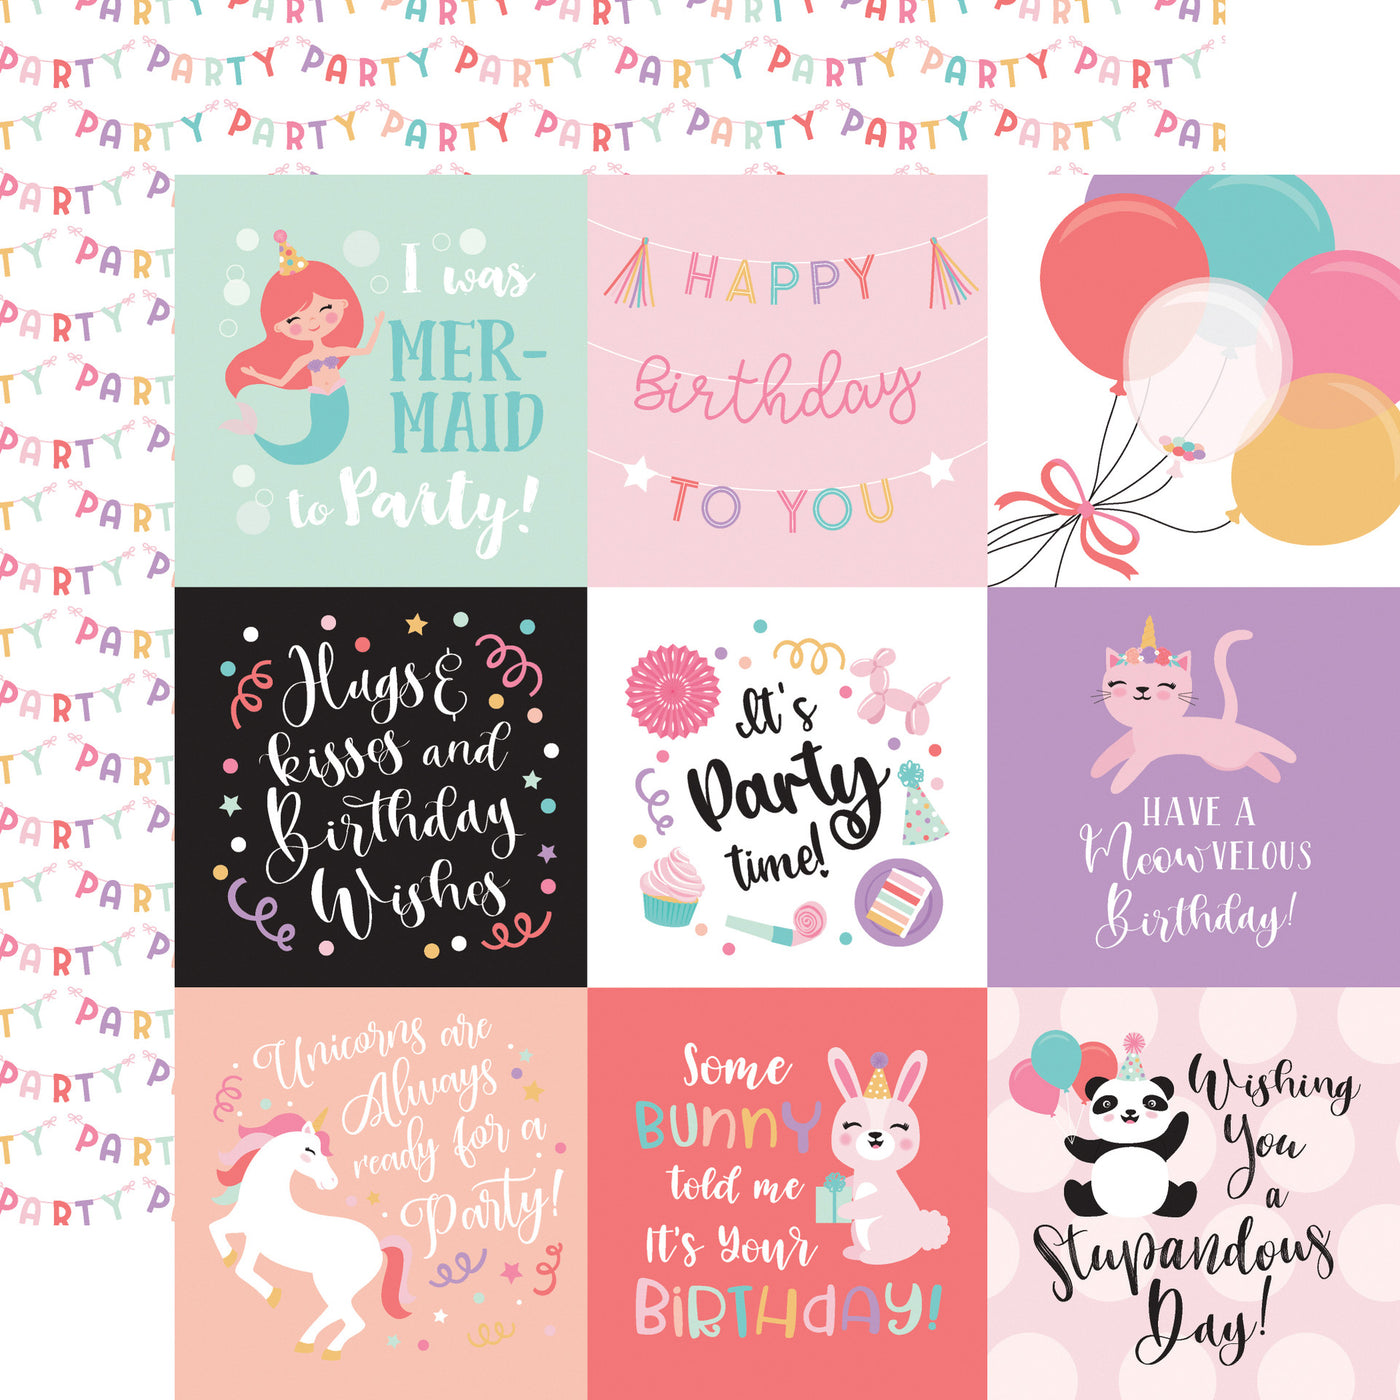 12x12 double-sided multi-colored patterned paper from Echo Park Paper (colorful pastel birthday 4X4 journaling cards, pastel party banners on a white background reverse).